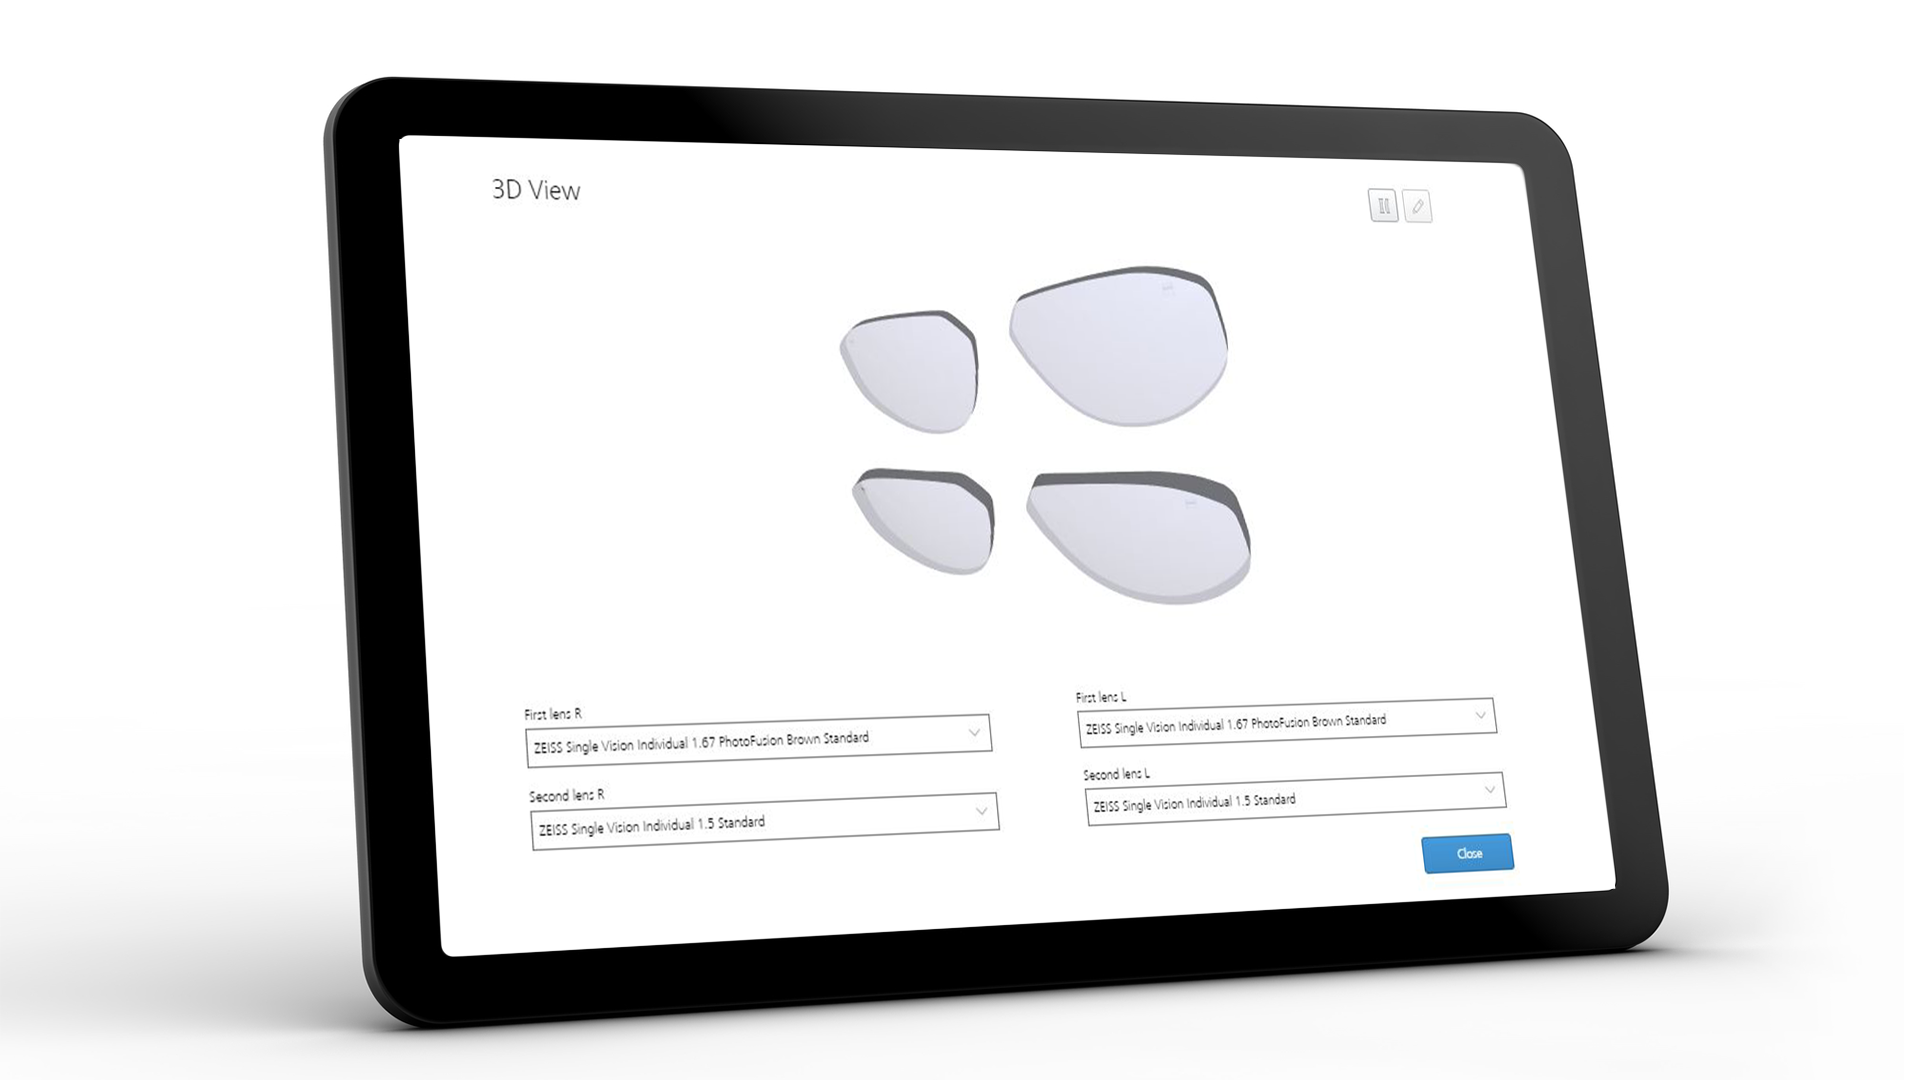 Tablet screen showing the ZEISS VISUSTORE interface for 3D view 